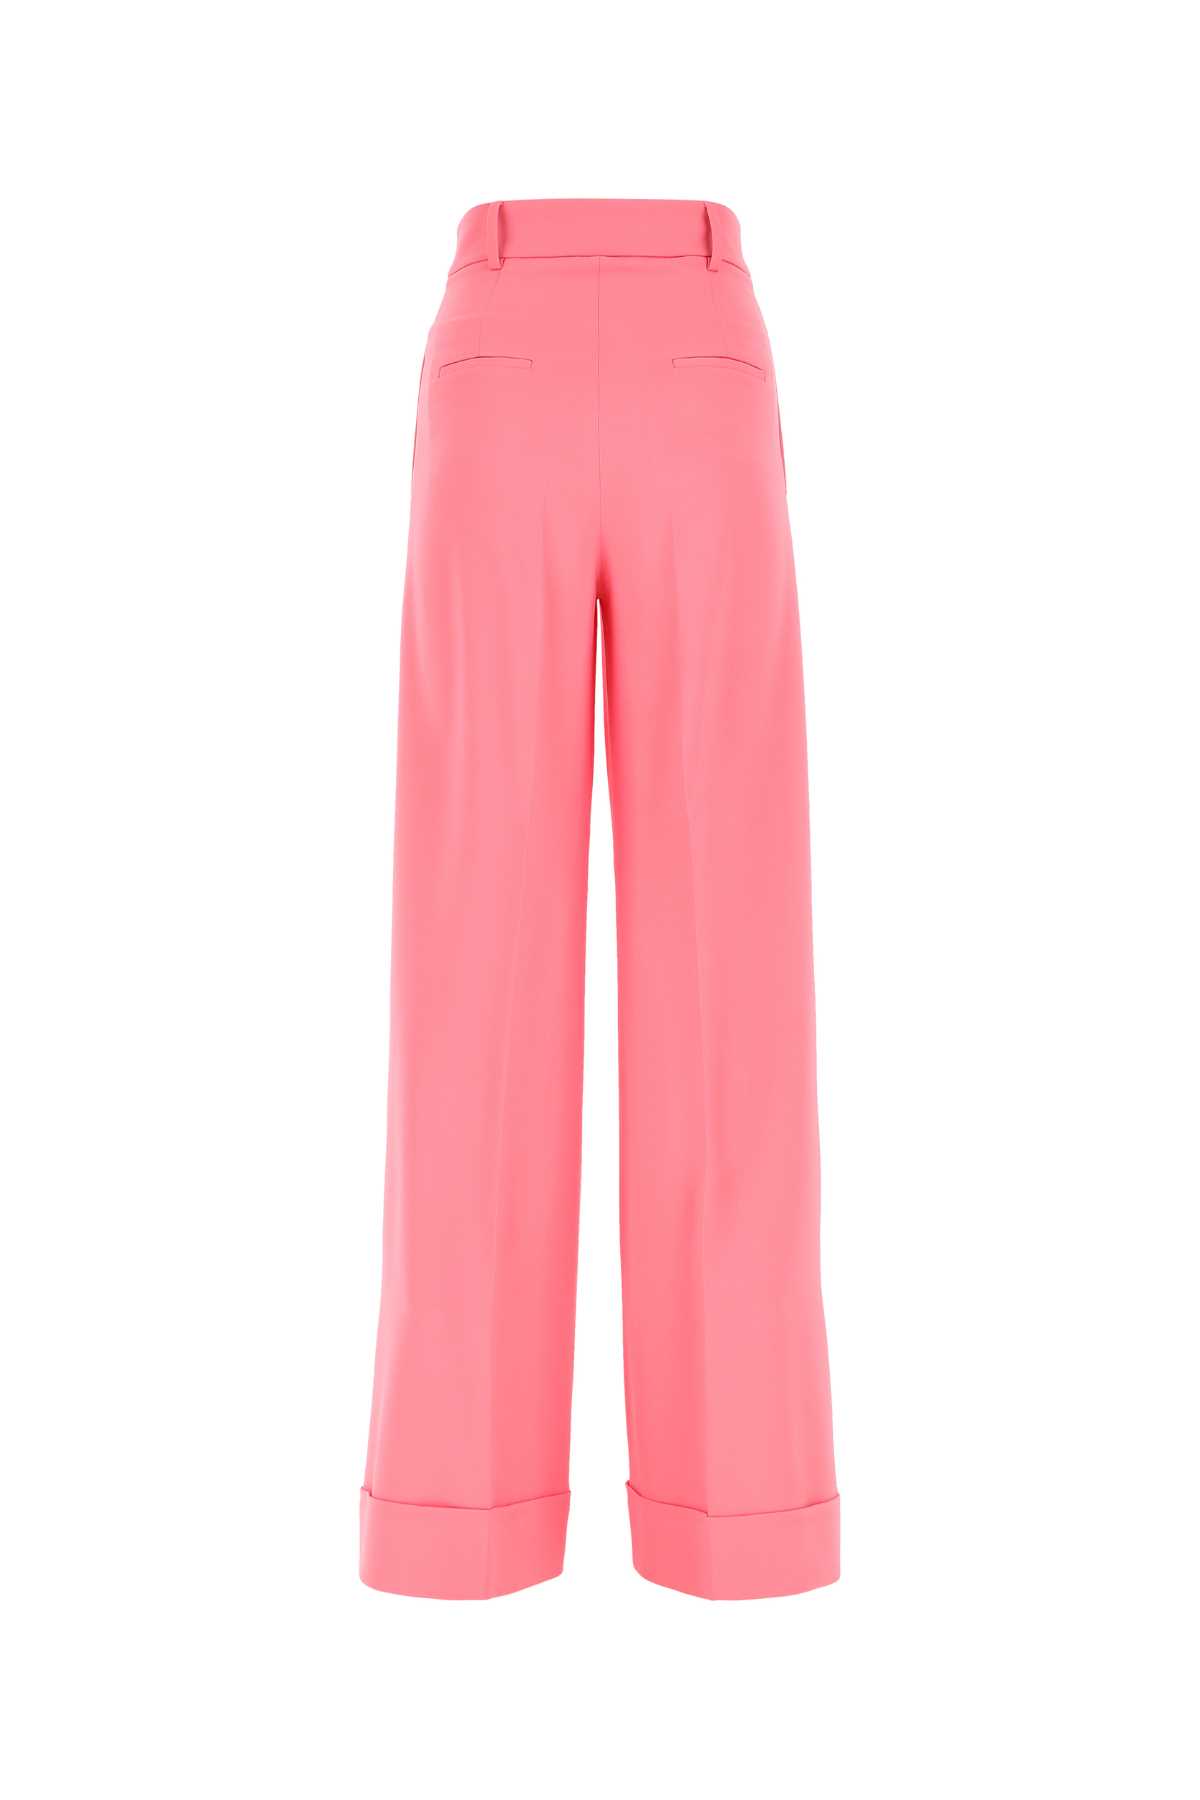 Moschino Pink Stretch Viscose Wide-leg Pant In 0205